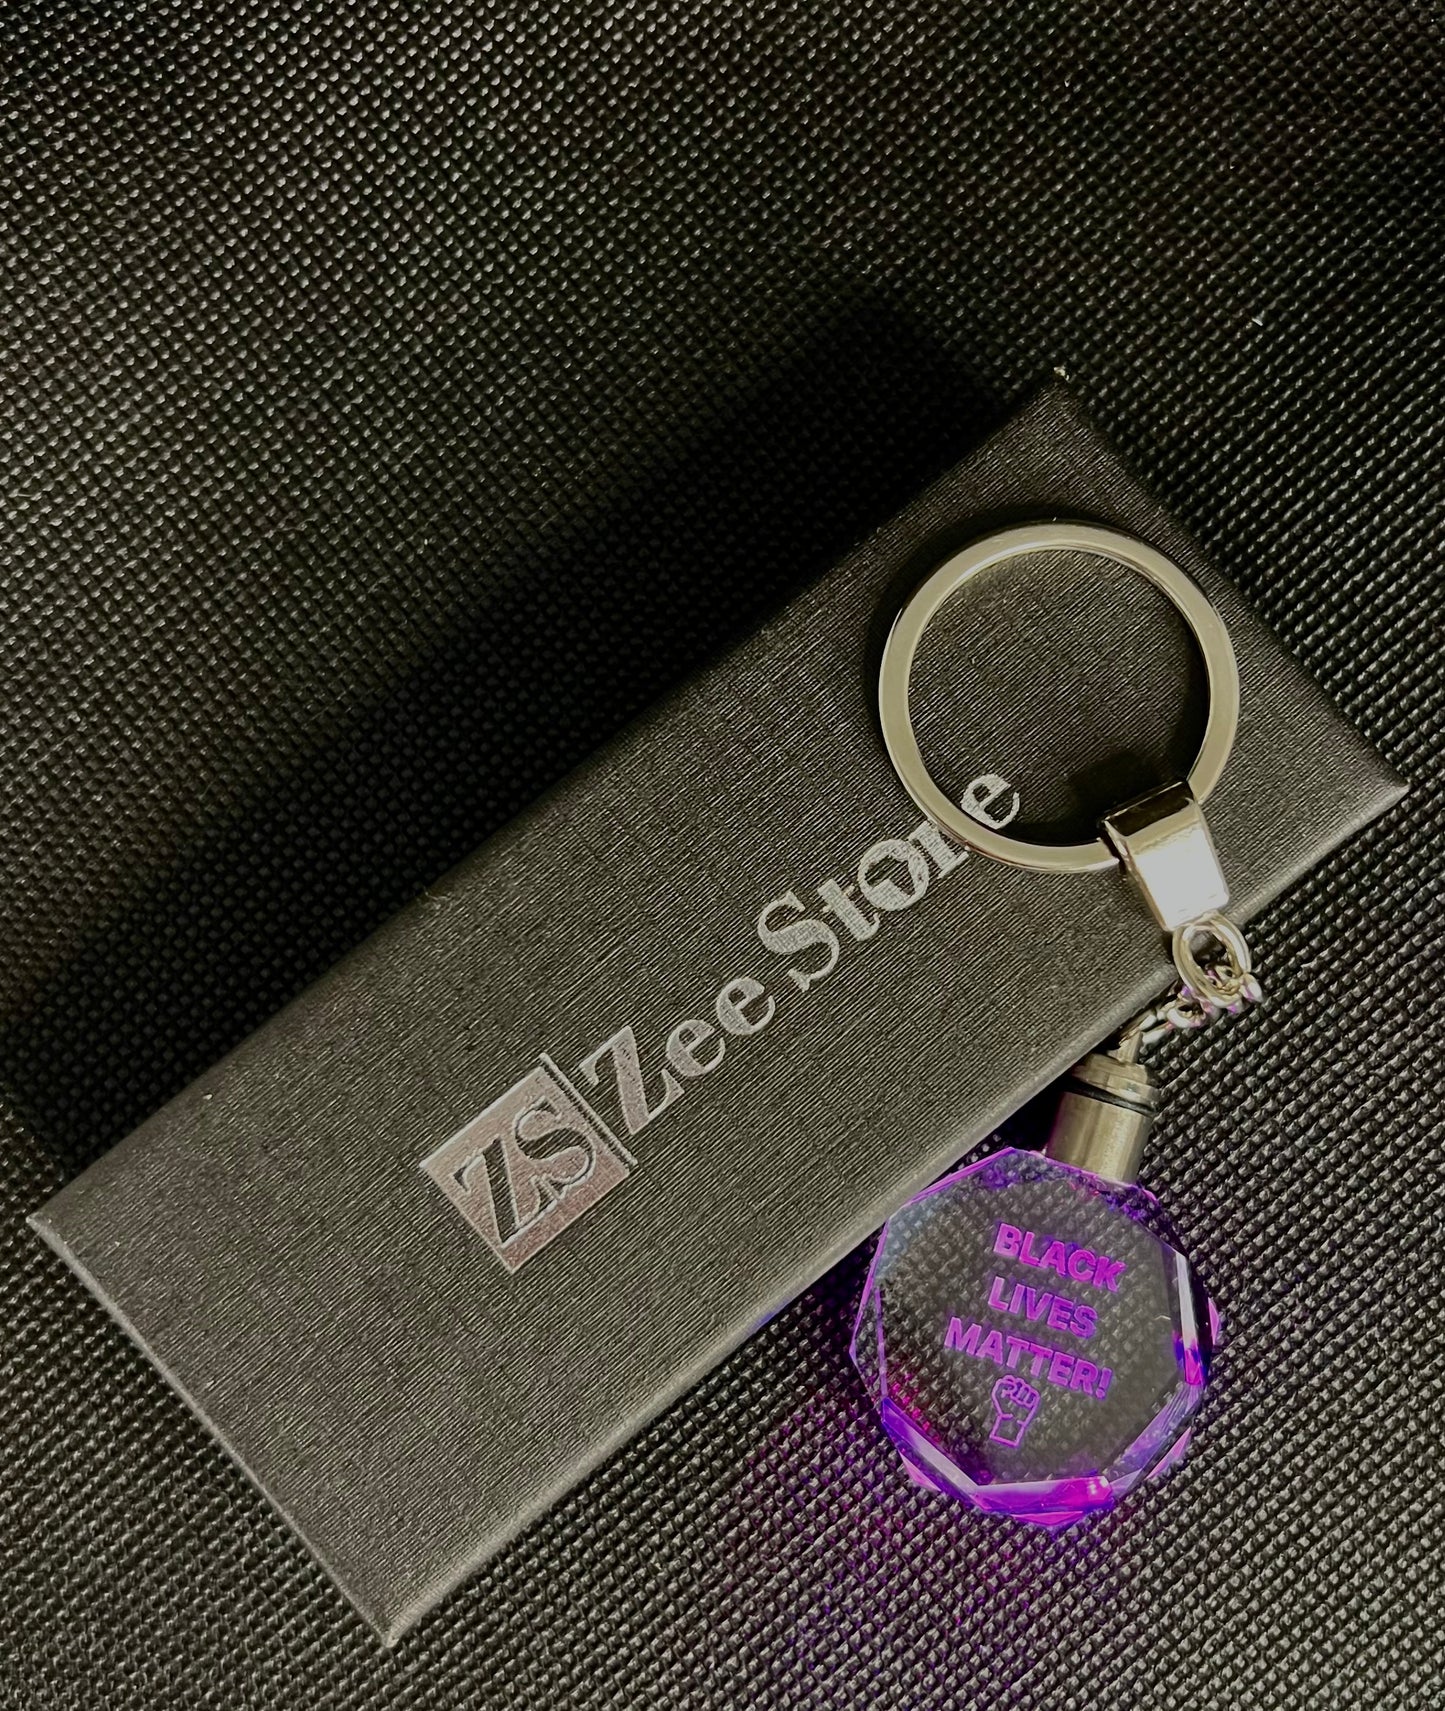 Agahu D - Black lives matter key chain made of  K9 crystal with LED light